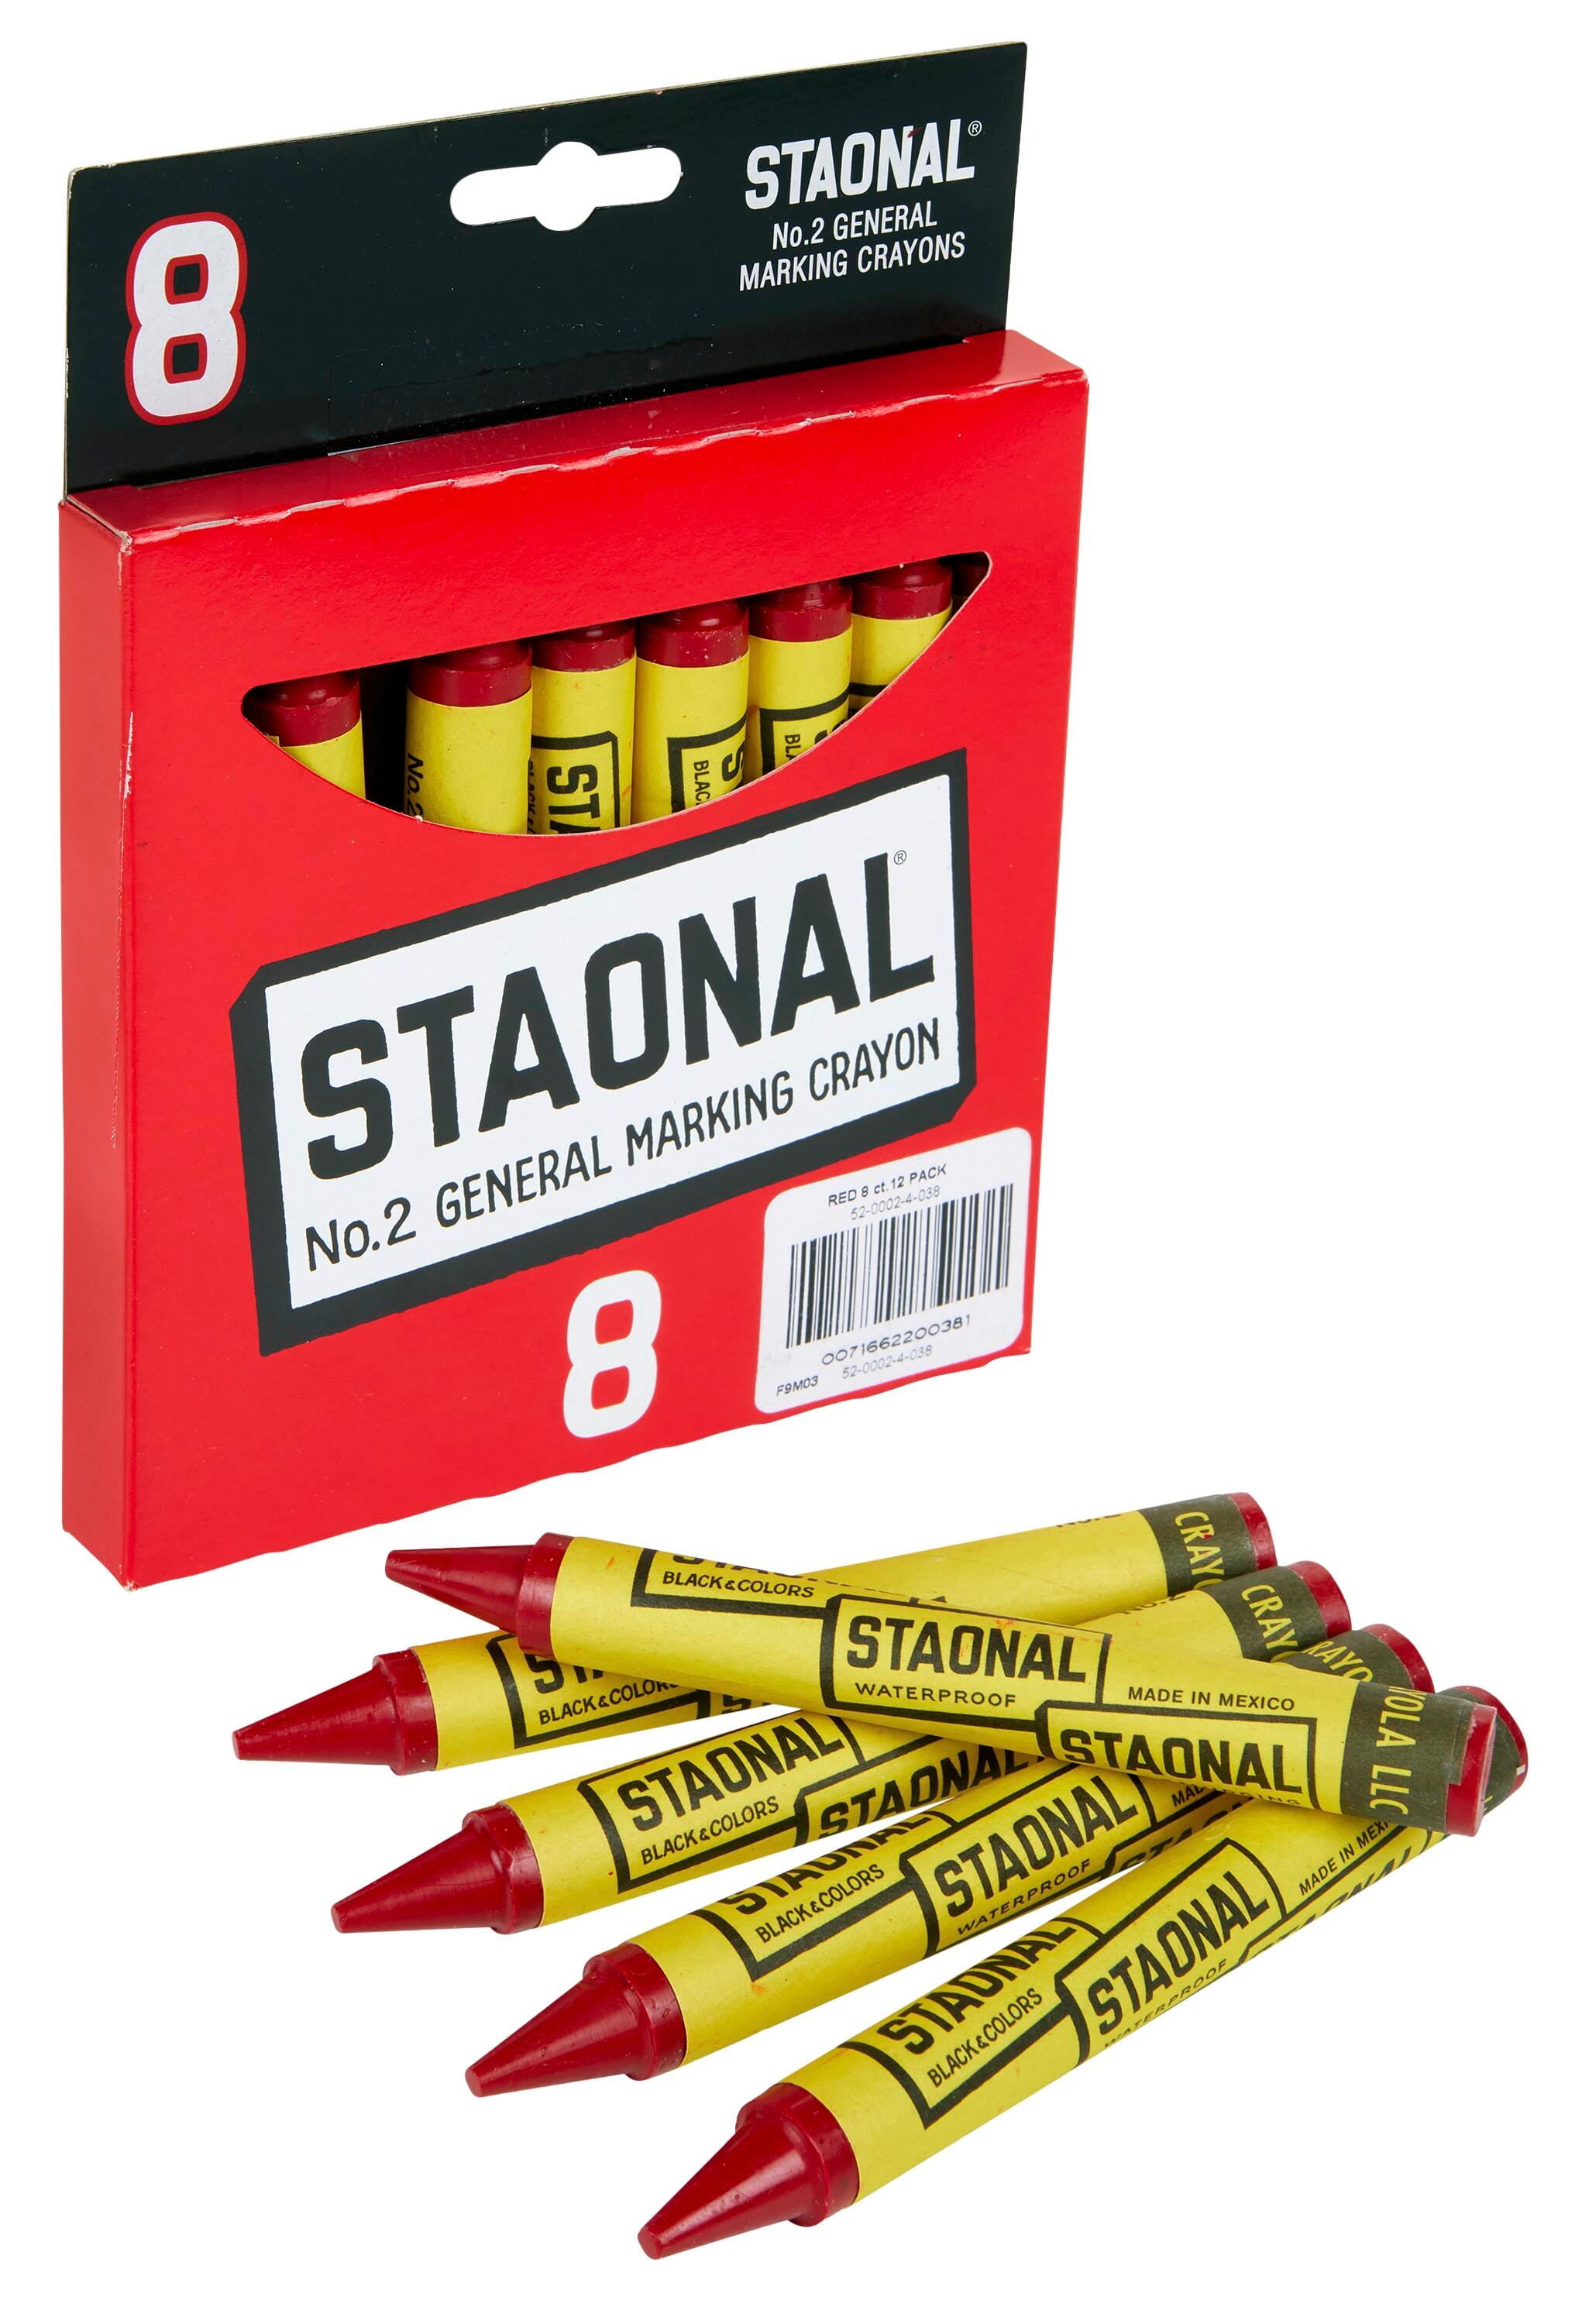 Crayola Staonal General Marking Crayon, Red, Pack of 8